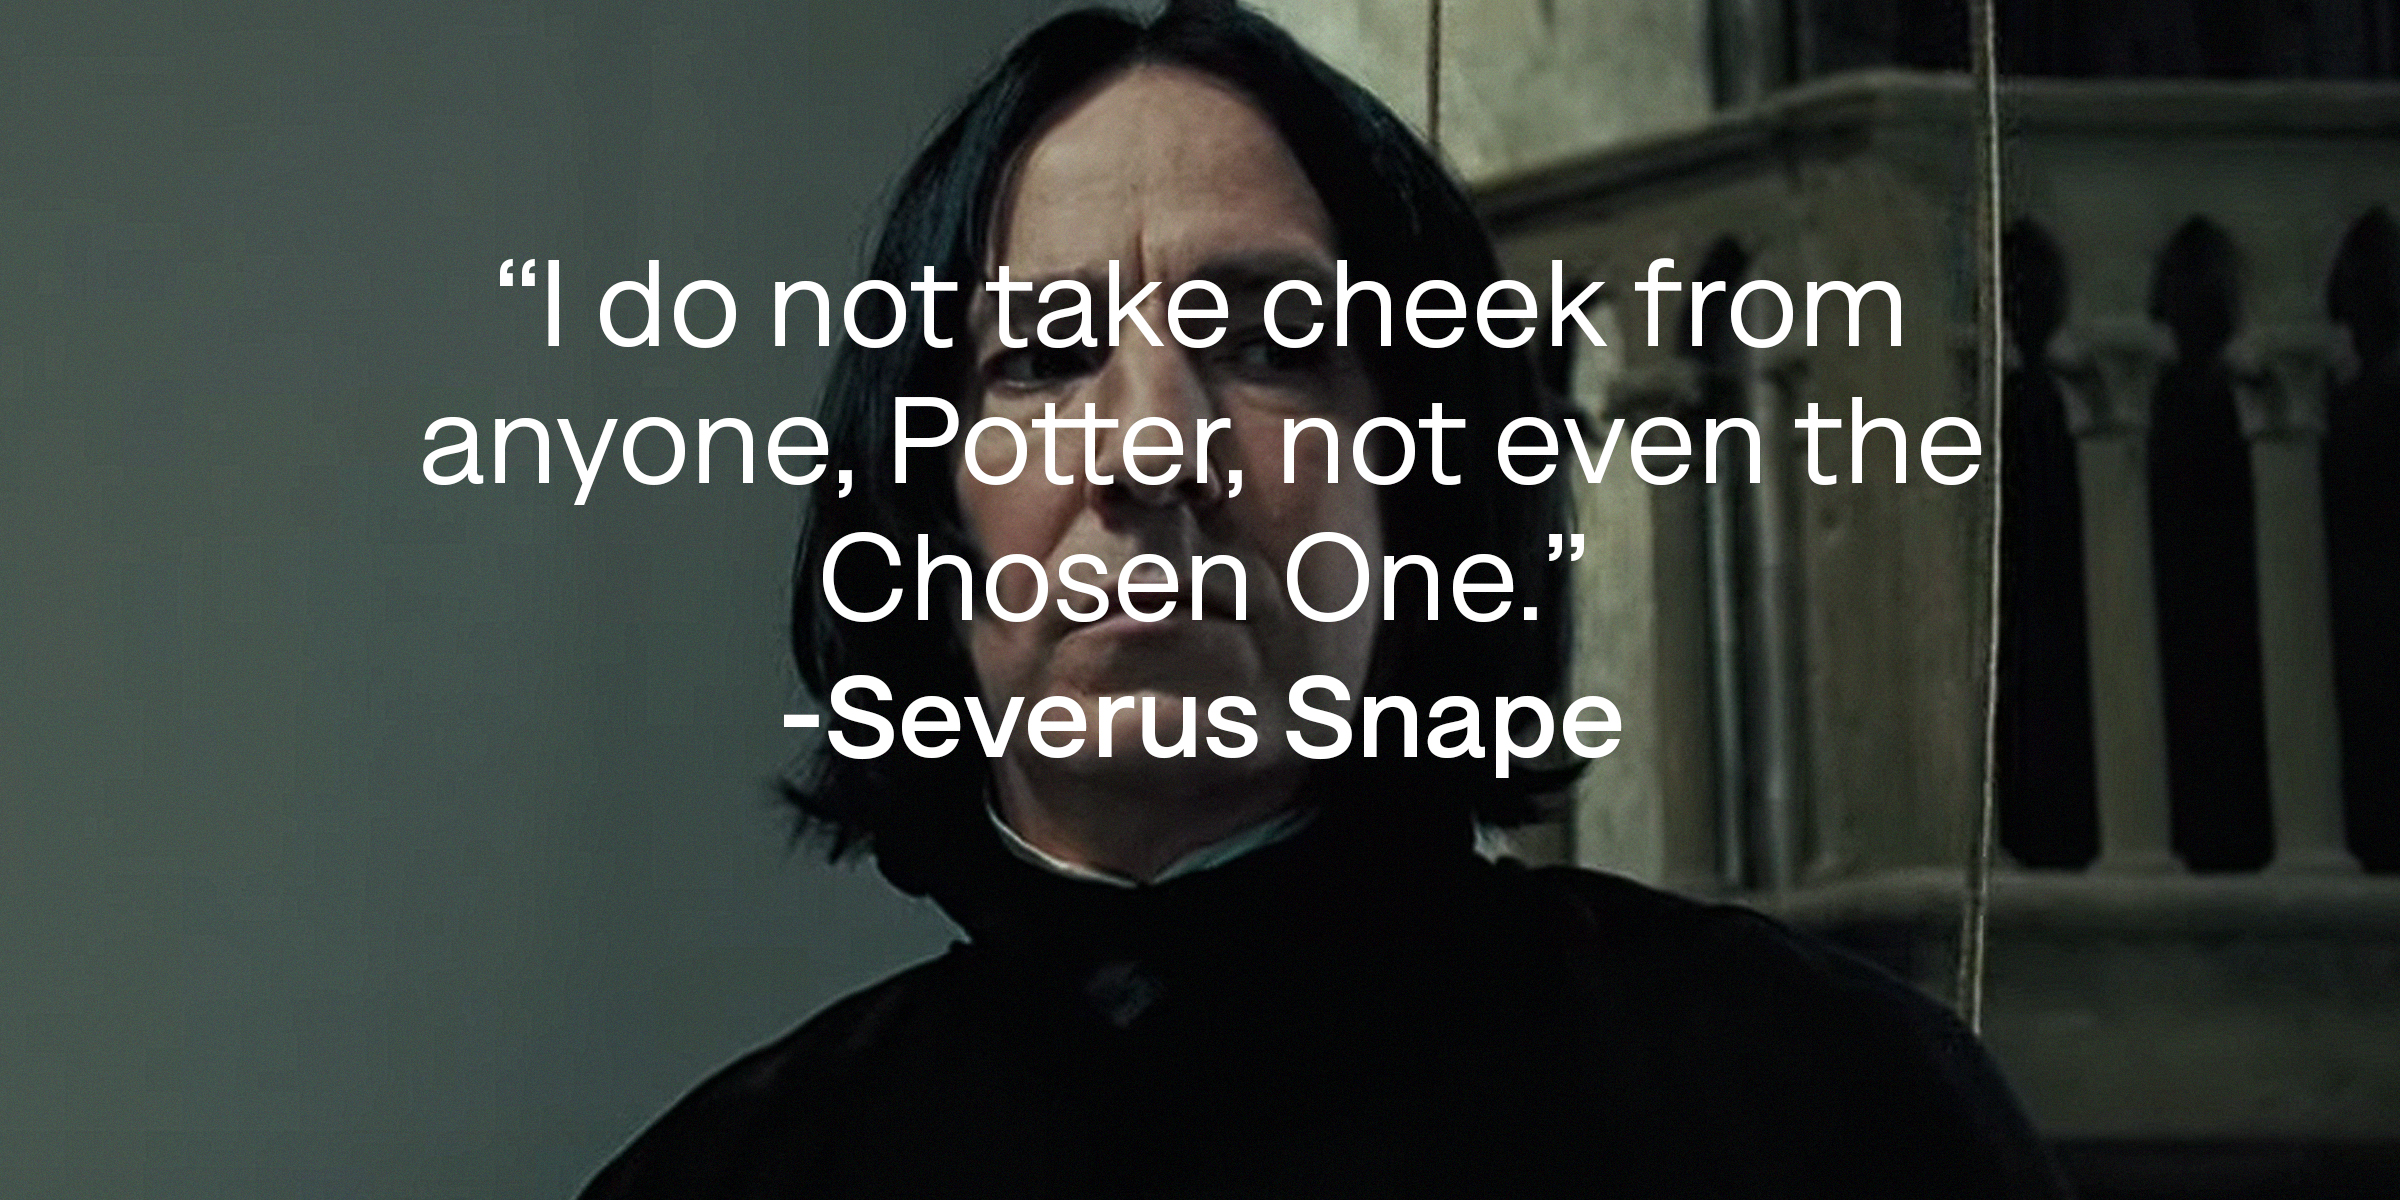 Severus Snape's quote: "I do not take cheek from anyone, Potter, not even the Chosen One." | Source: YouTube/harrypotter